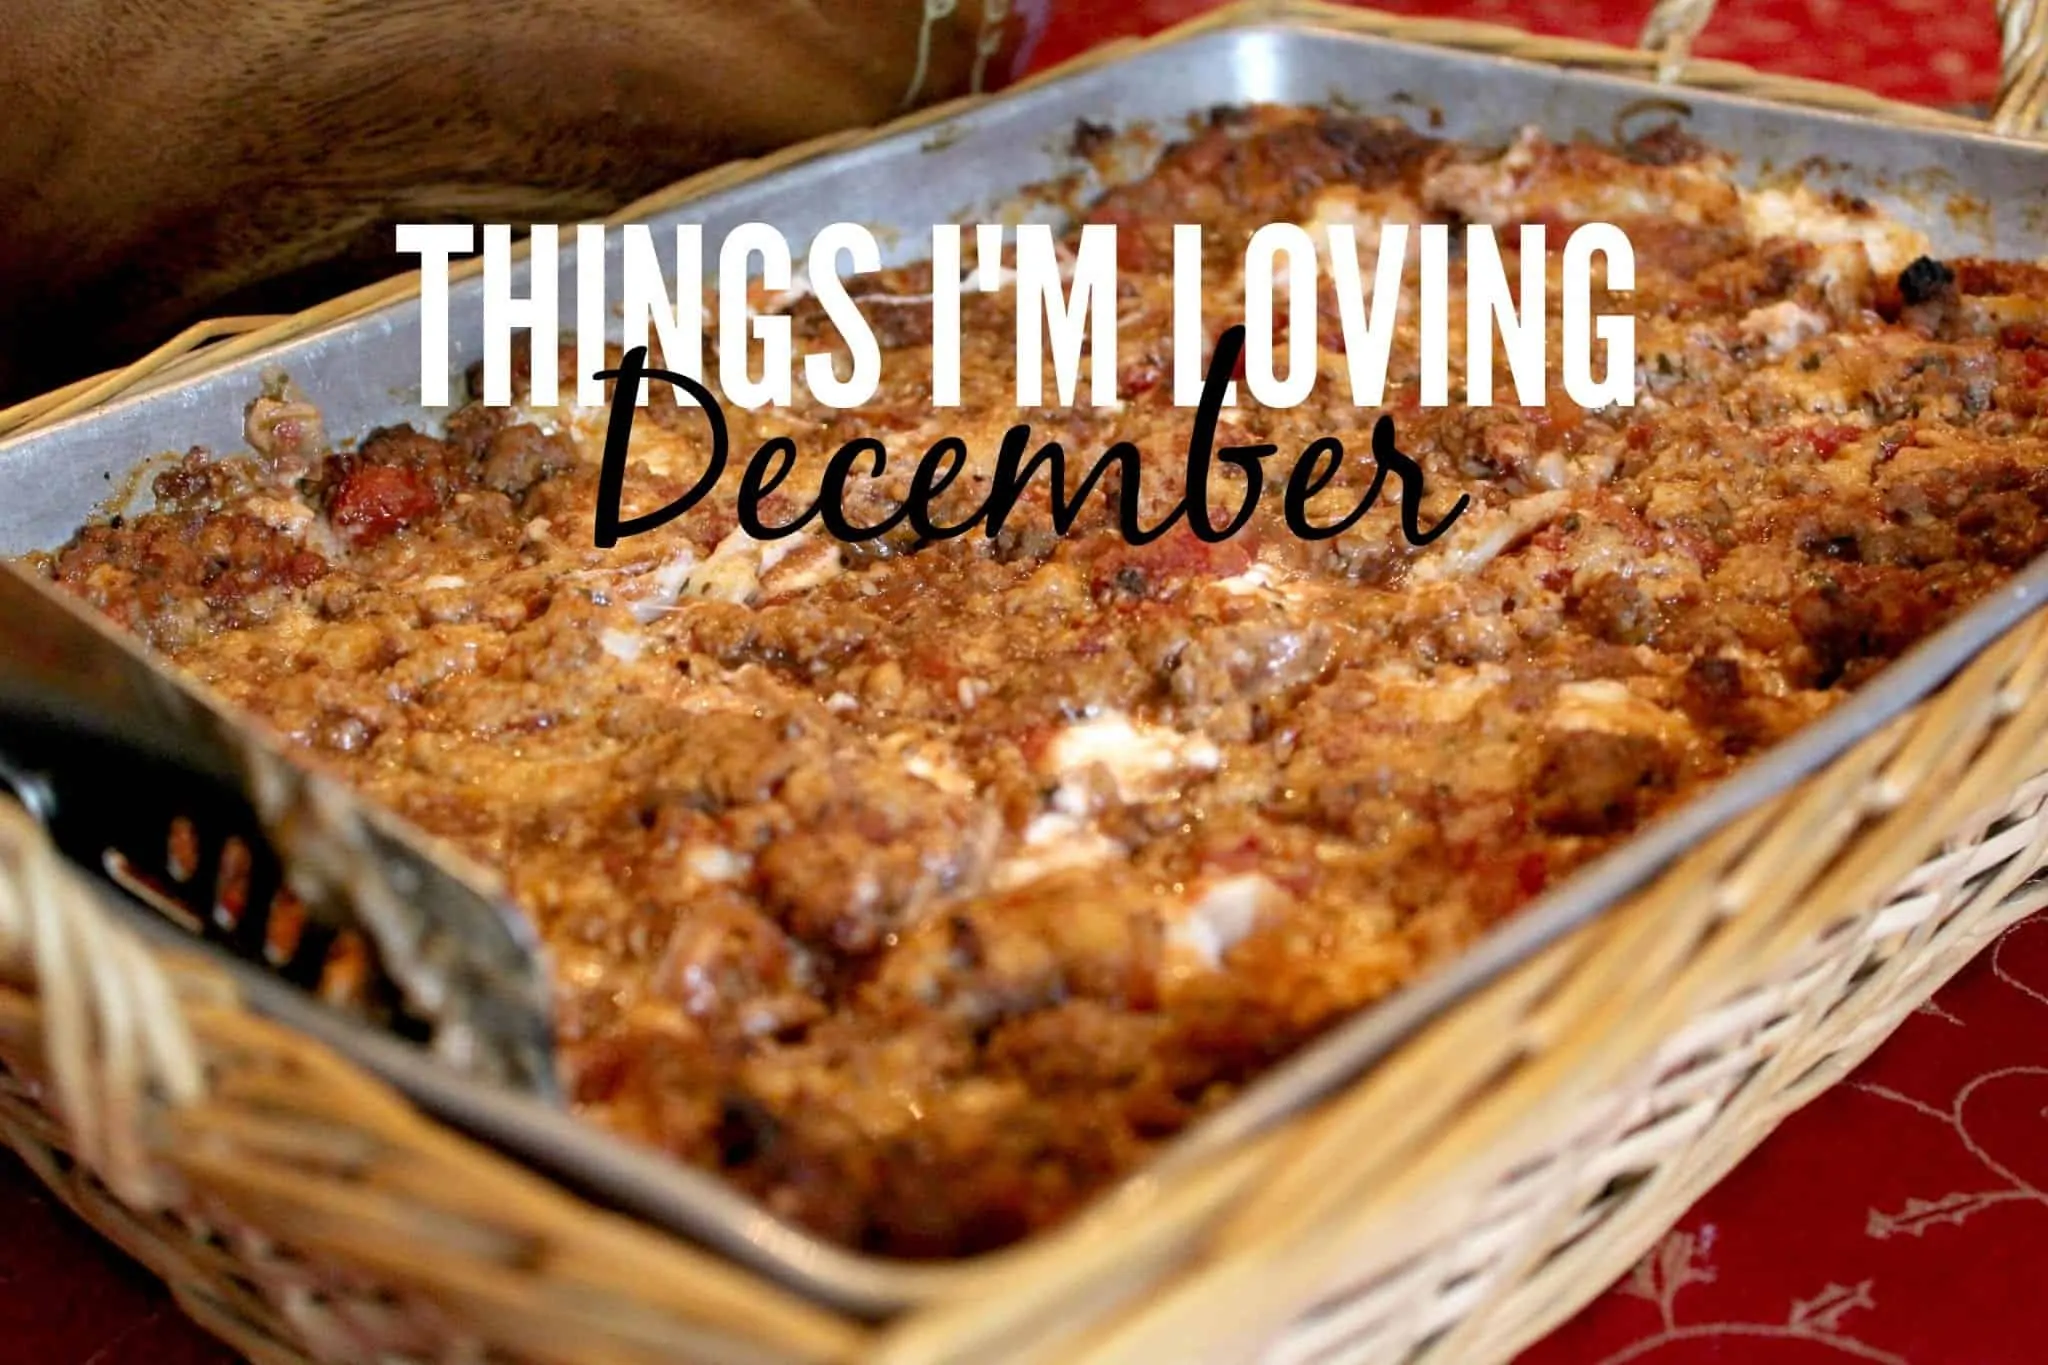 Things I'm Loving December 2015 from Treble in the Kitchen